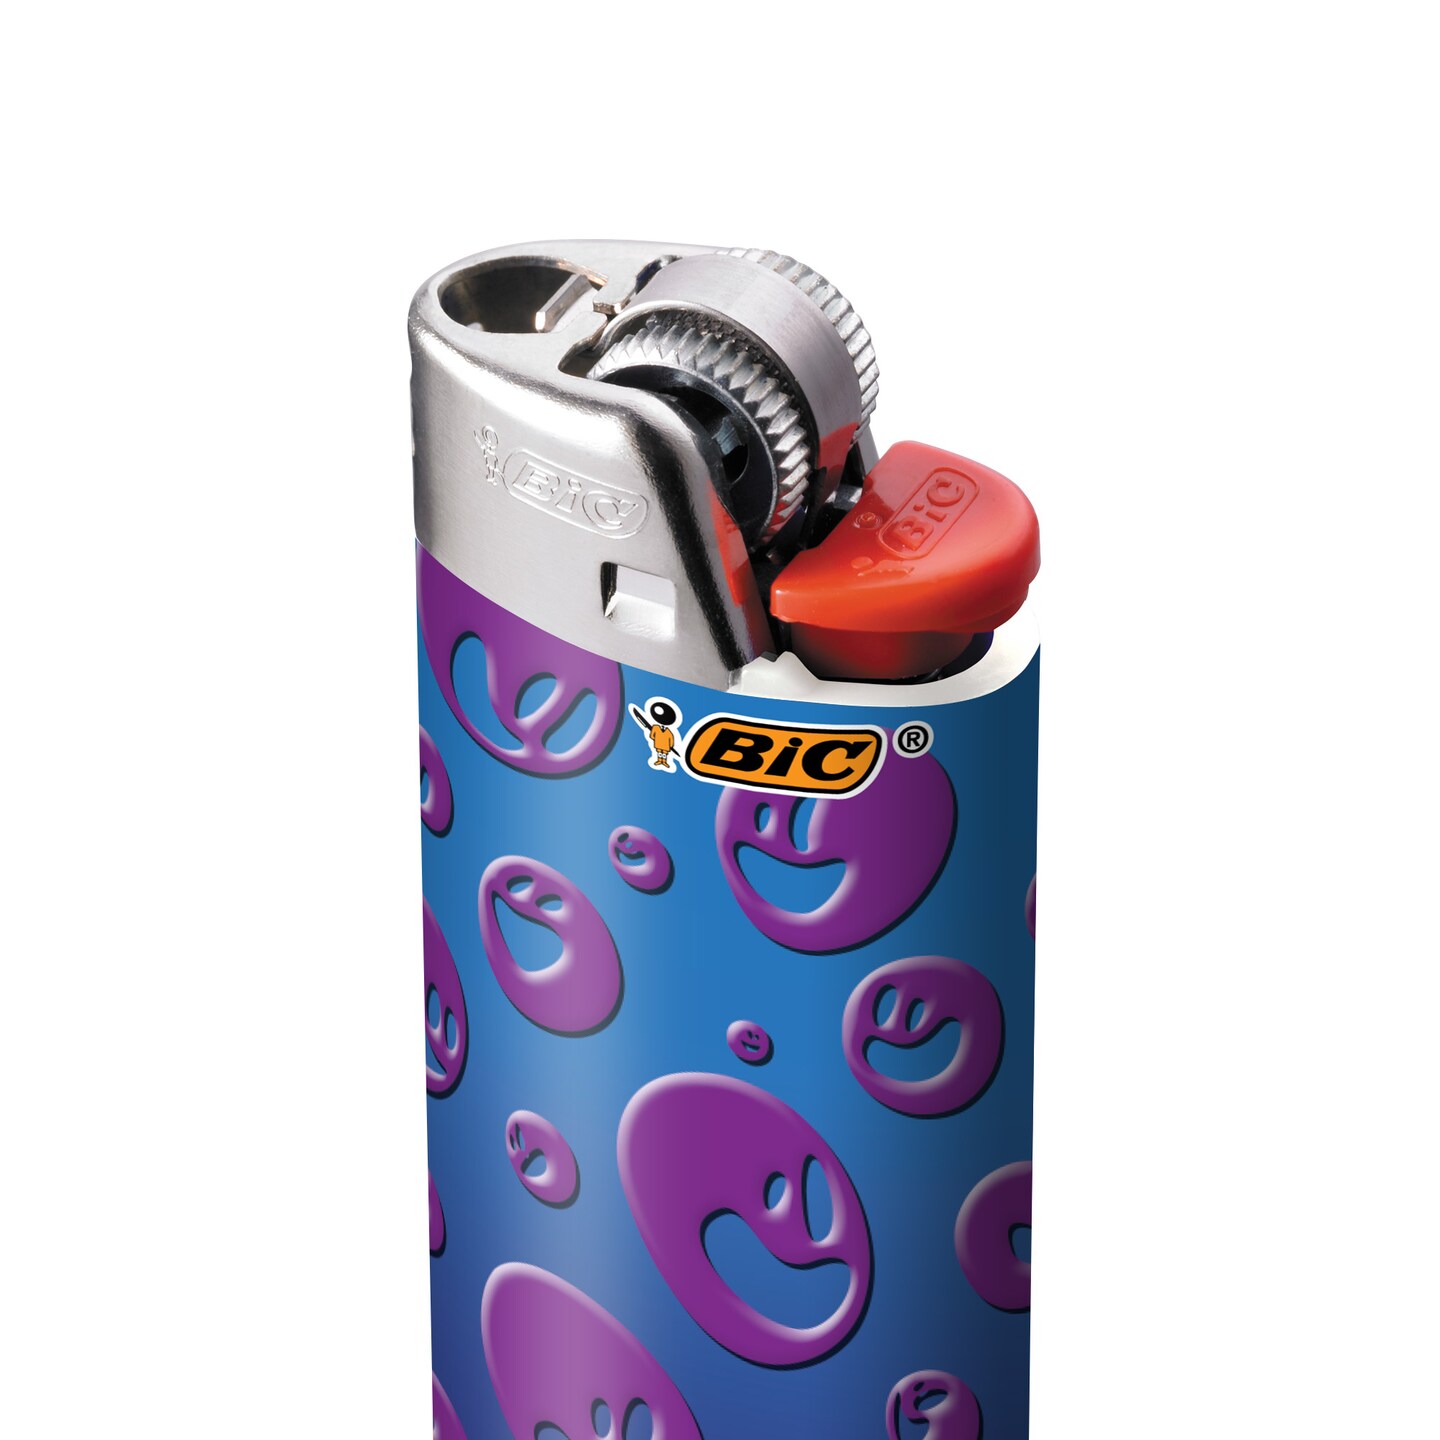 BIC Special Edition Rotating Trends Series Lighters, Set of 8 Lighters